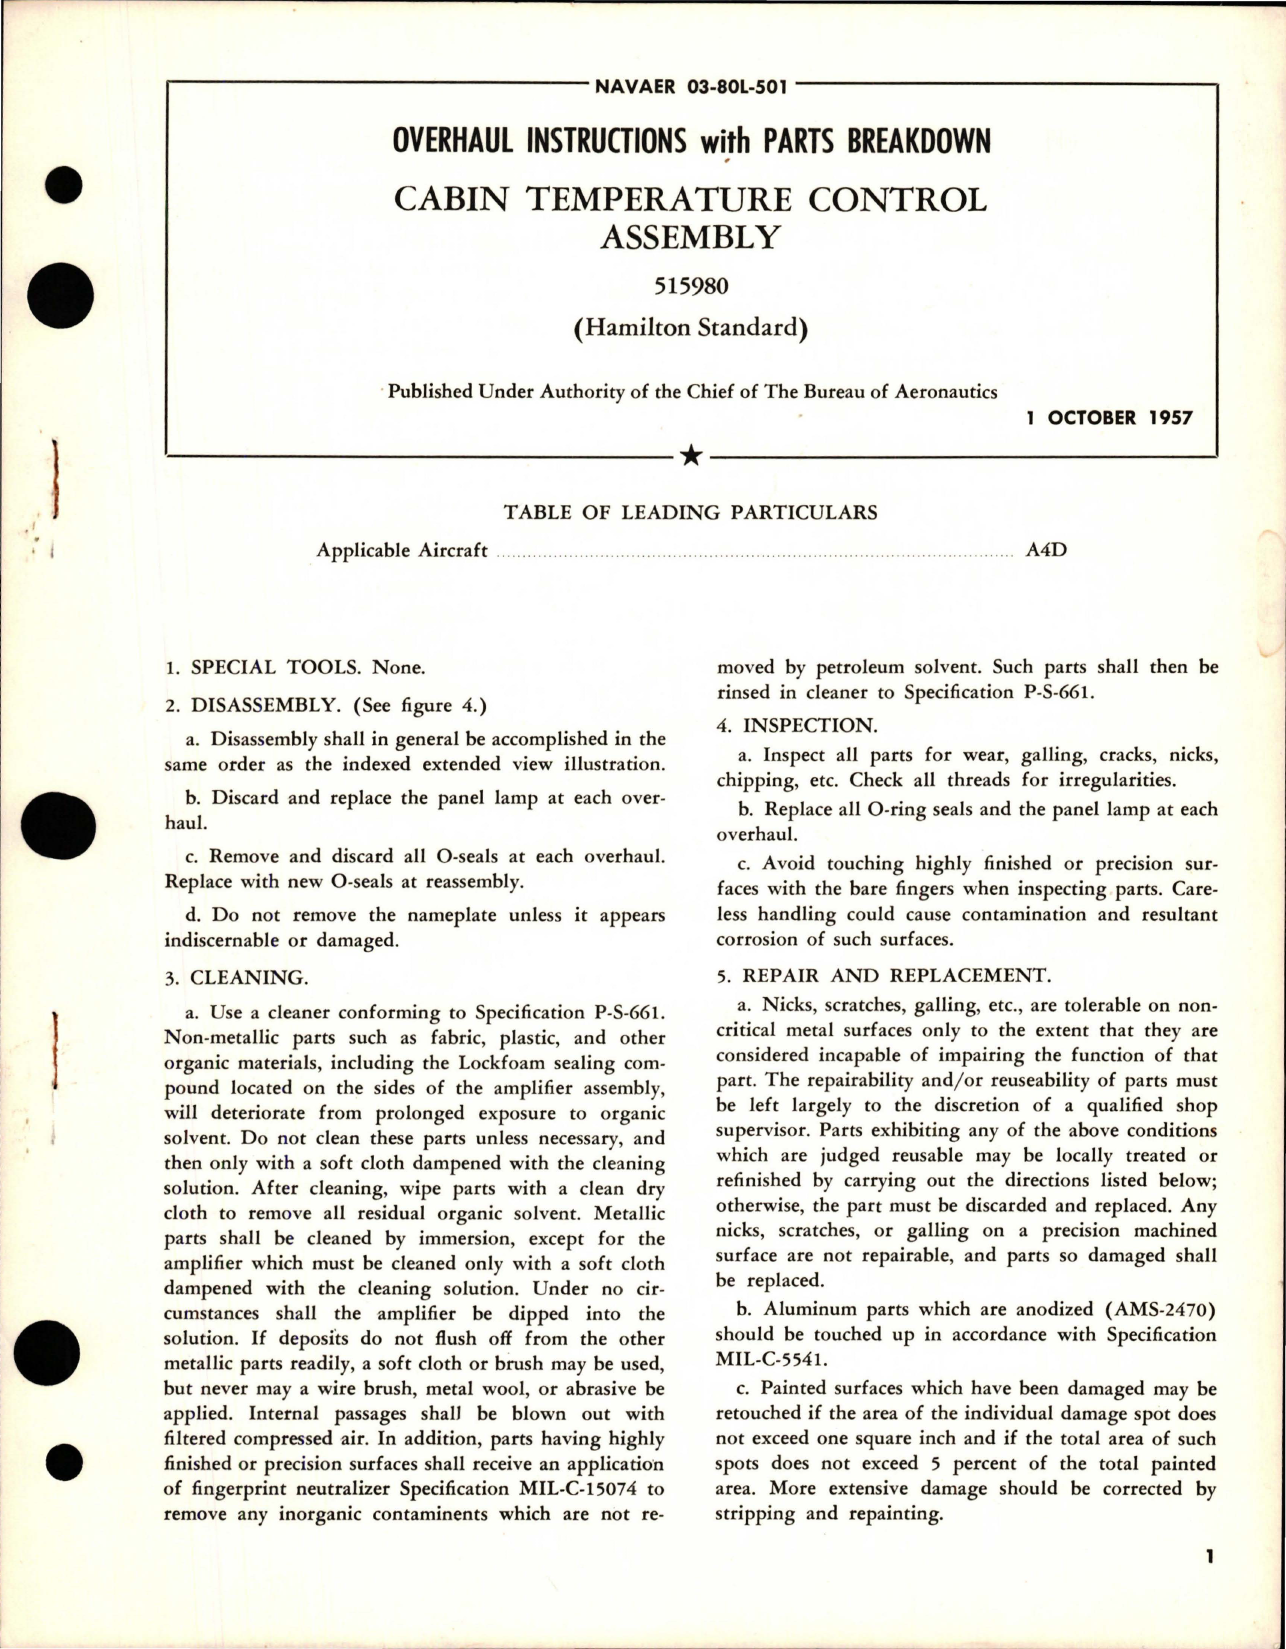 Sample page 1 from AirCorps Library document: Overhaul Instructions with Parts for Cabin Temperature Control Assembly - 515980